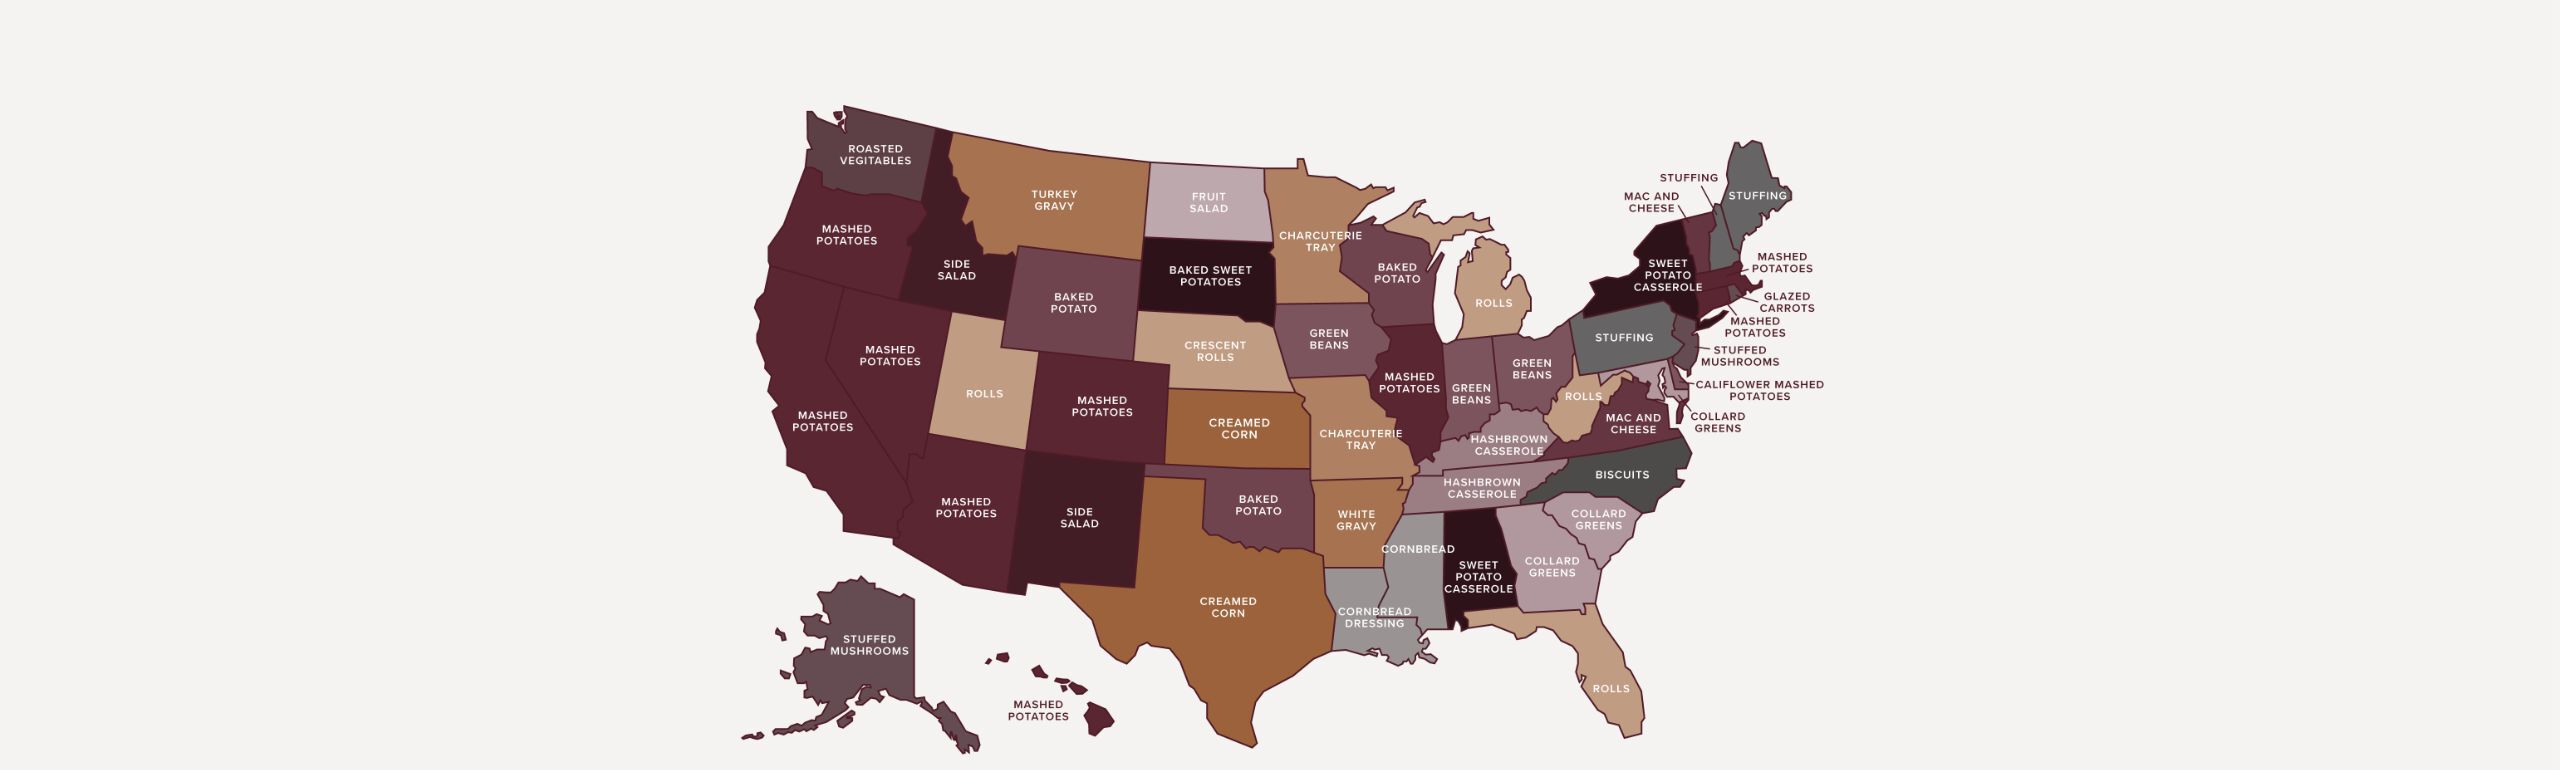 Map of the USA showing states favorite thanksgiving side dishes